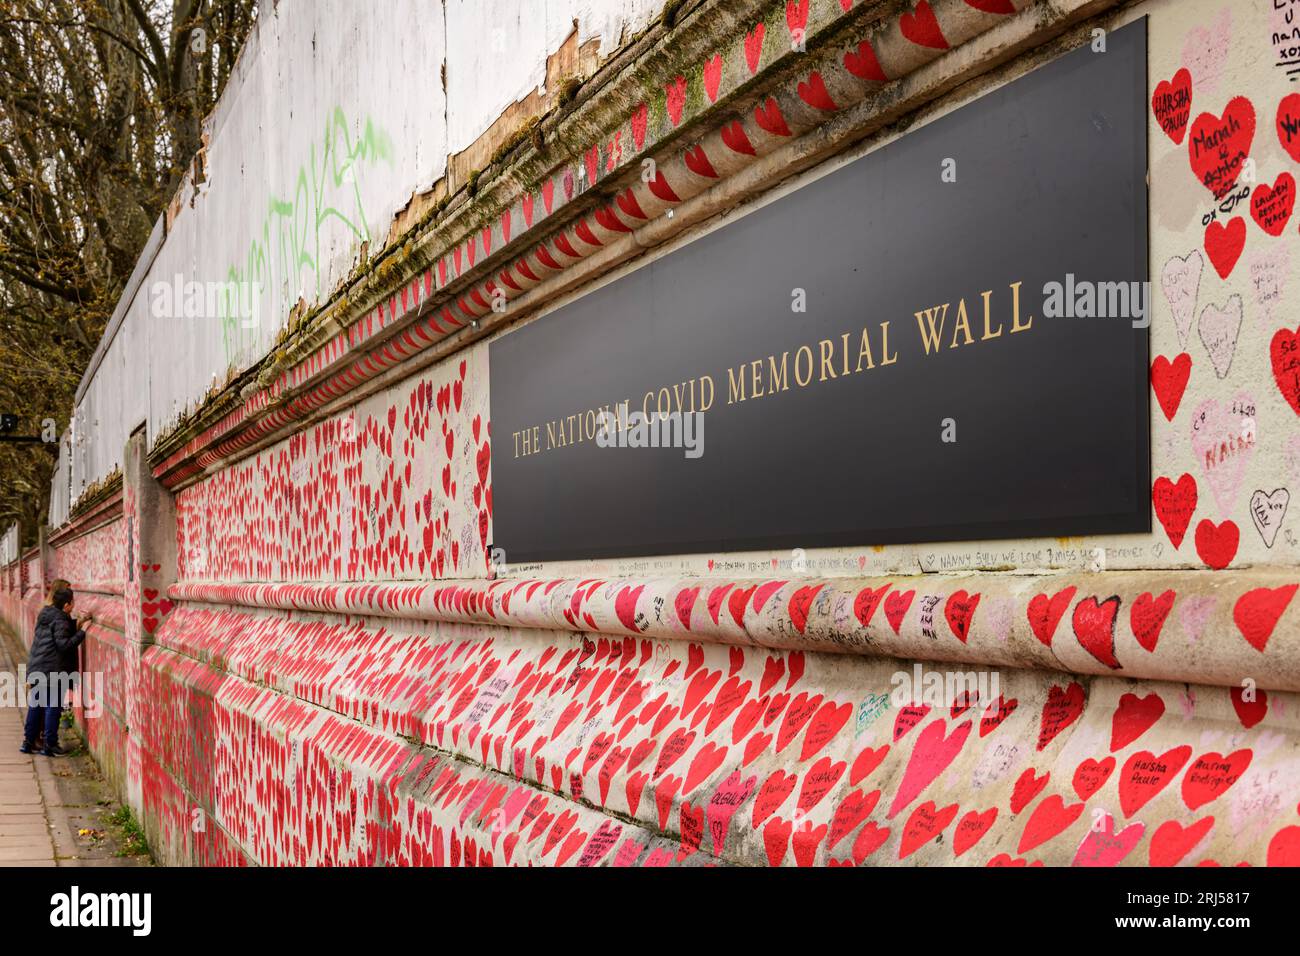 A lady writes on 'The National Covid Memorial Wall' which is a public mural to commemorate the victims of the COVID-19 pandemic in the UK. Stretching Stock Photo